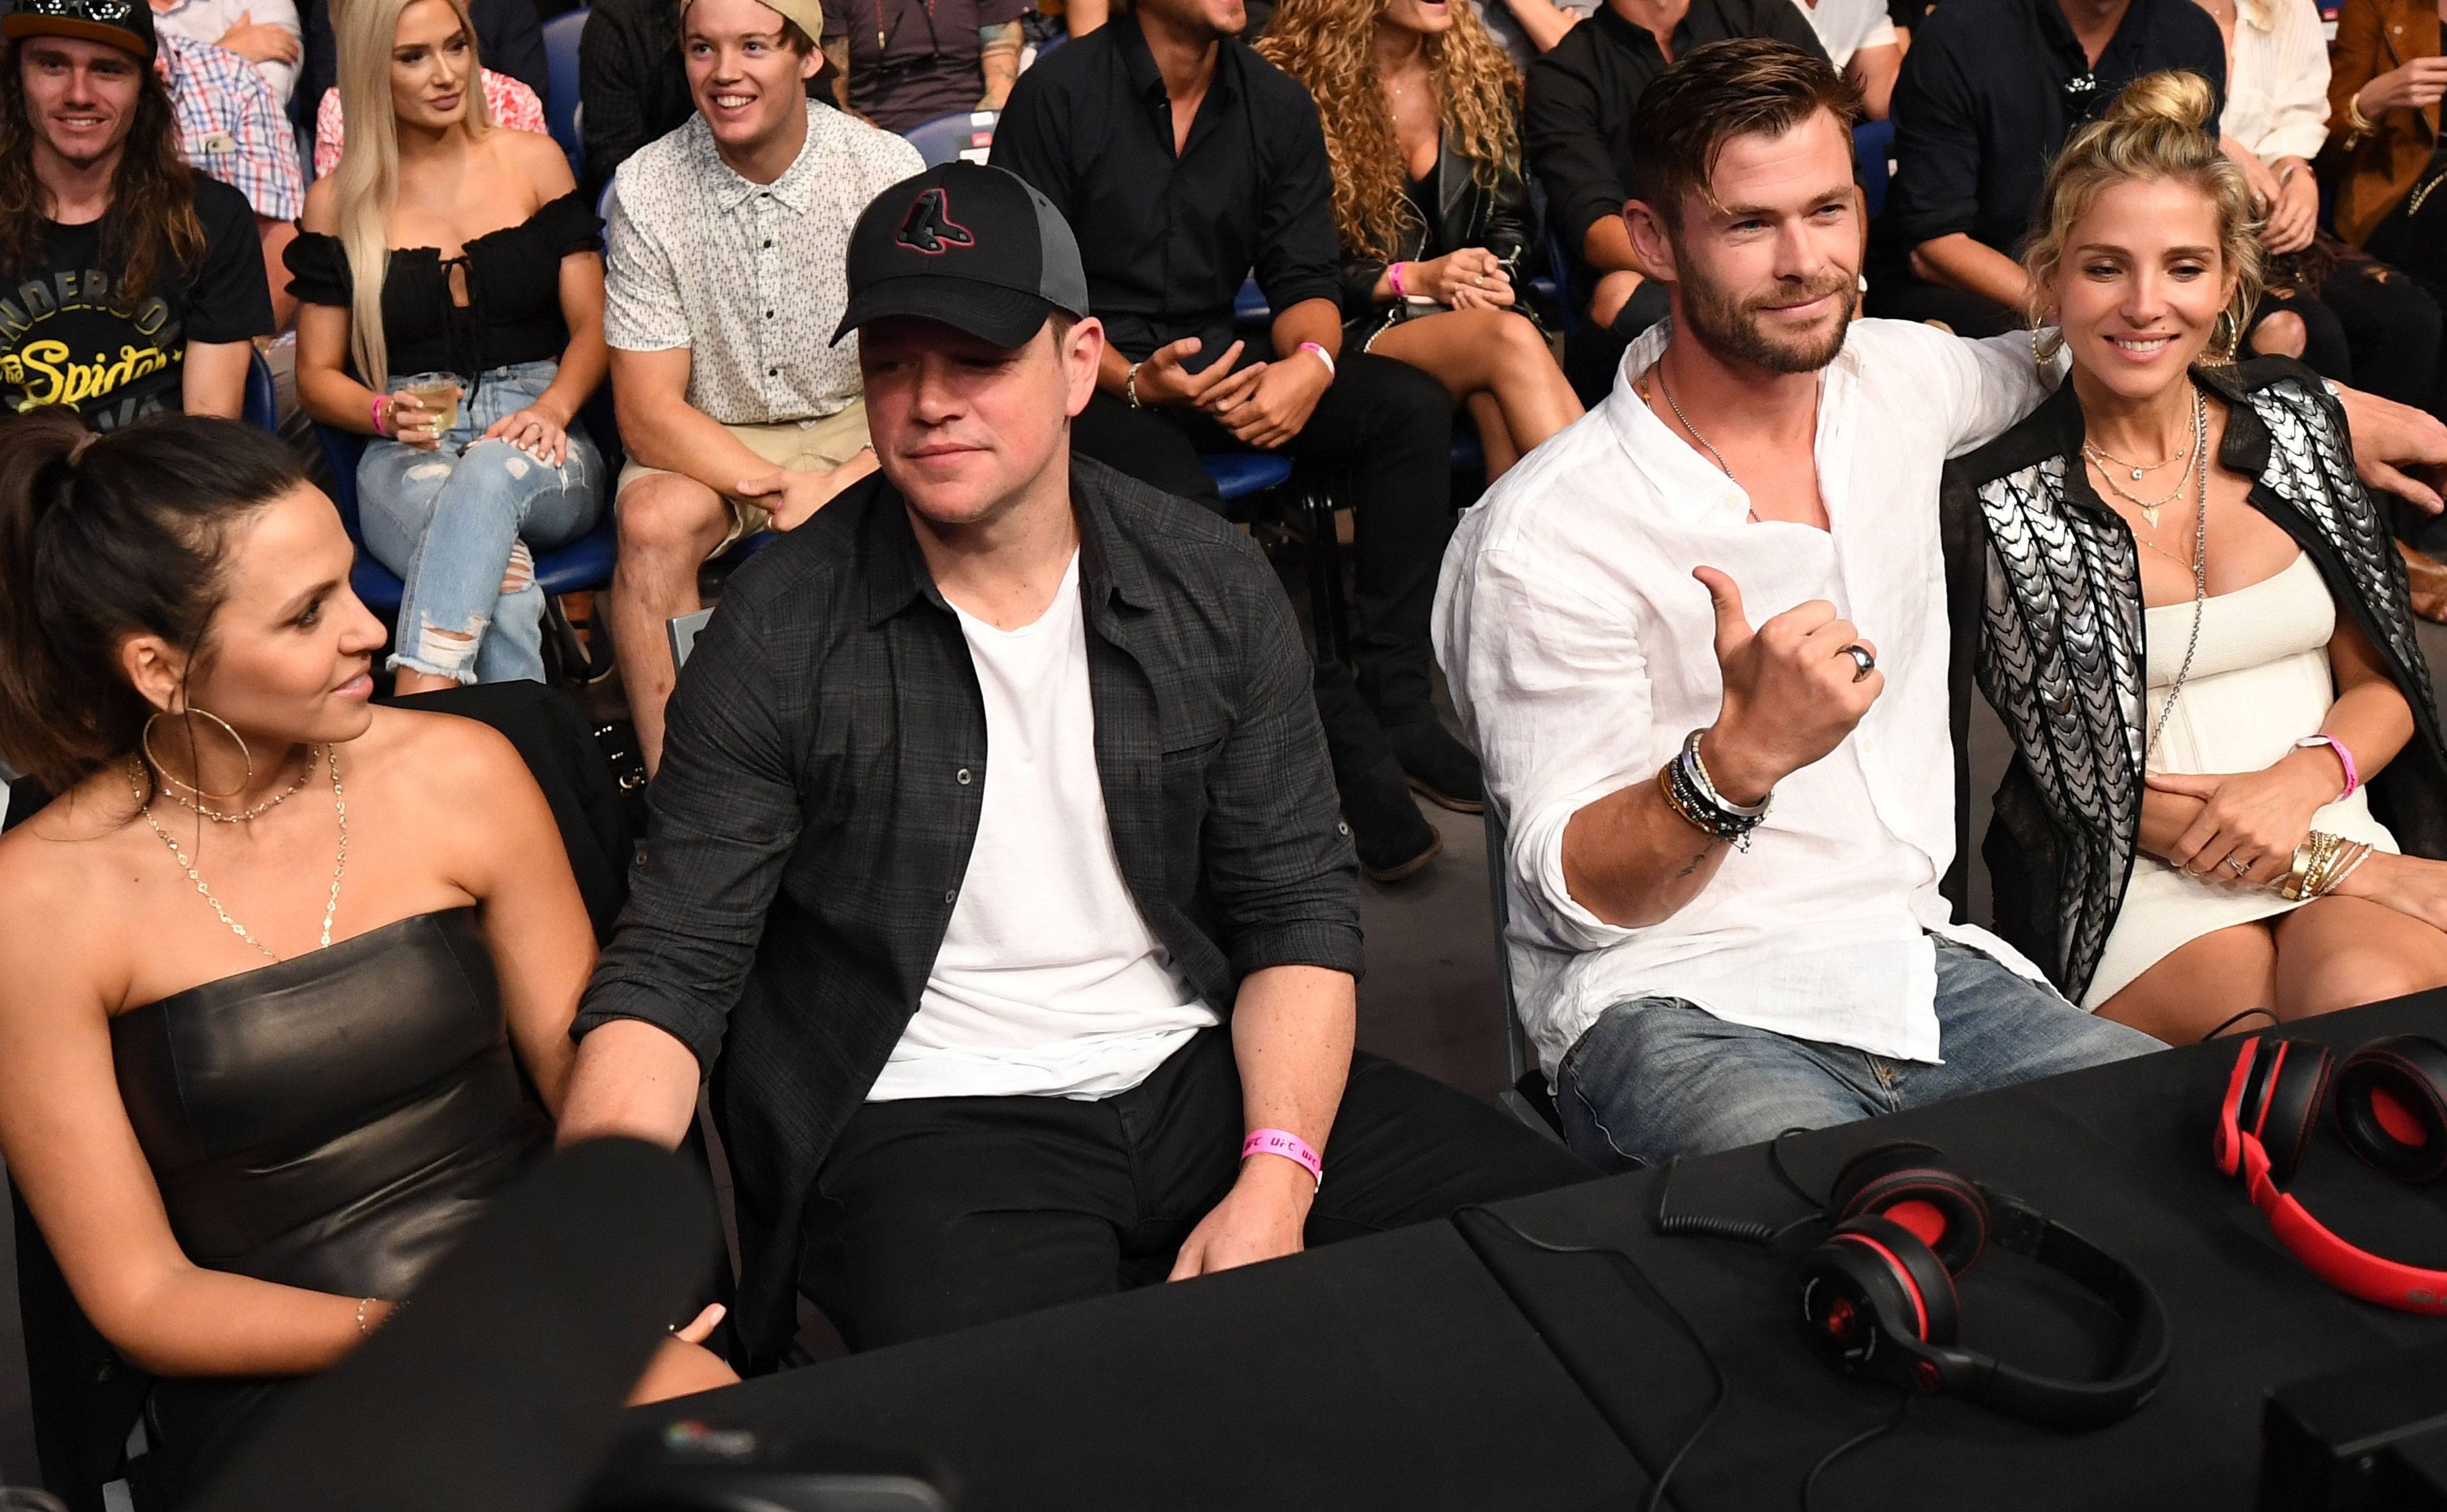 Matt Damon and Chris Hemsworth attend a game with their partners.